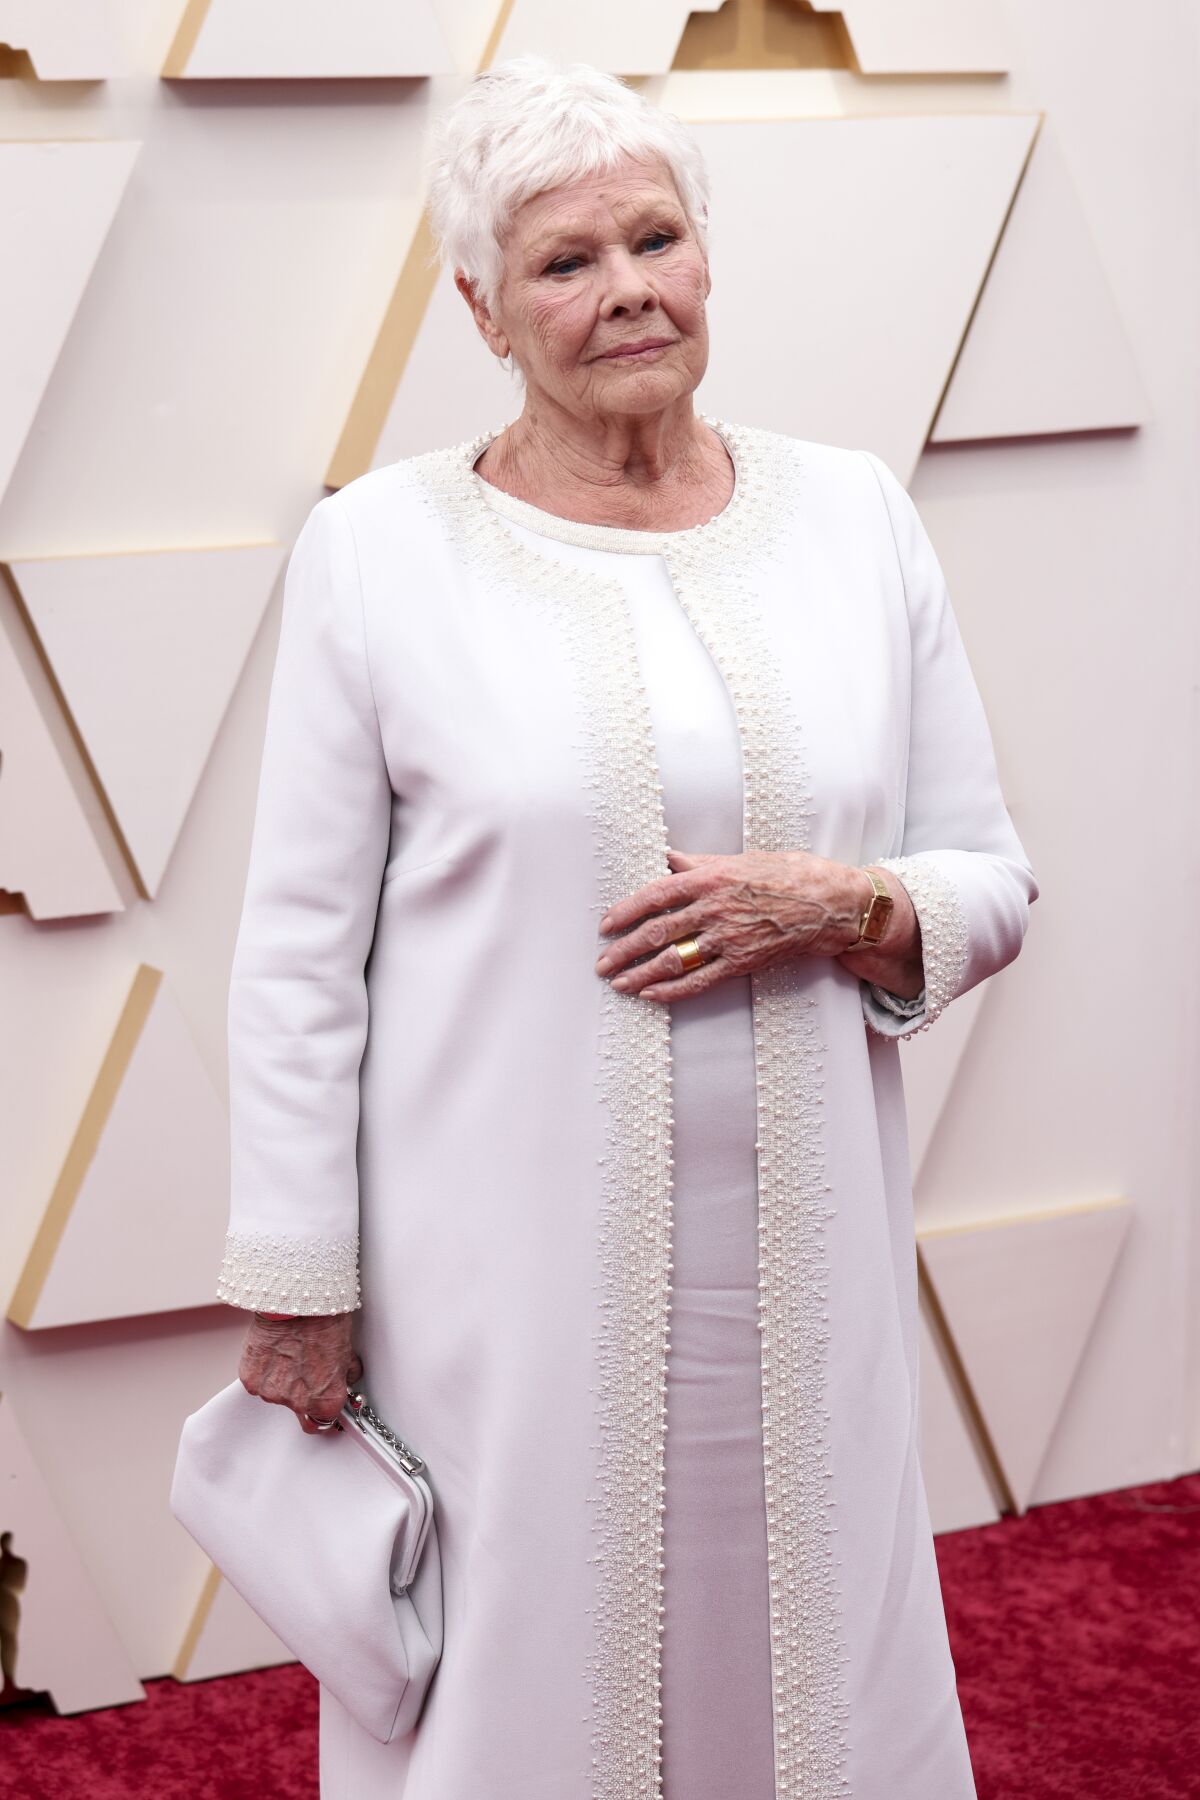 A woman stands on a red carpet dressed in white